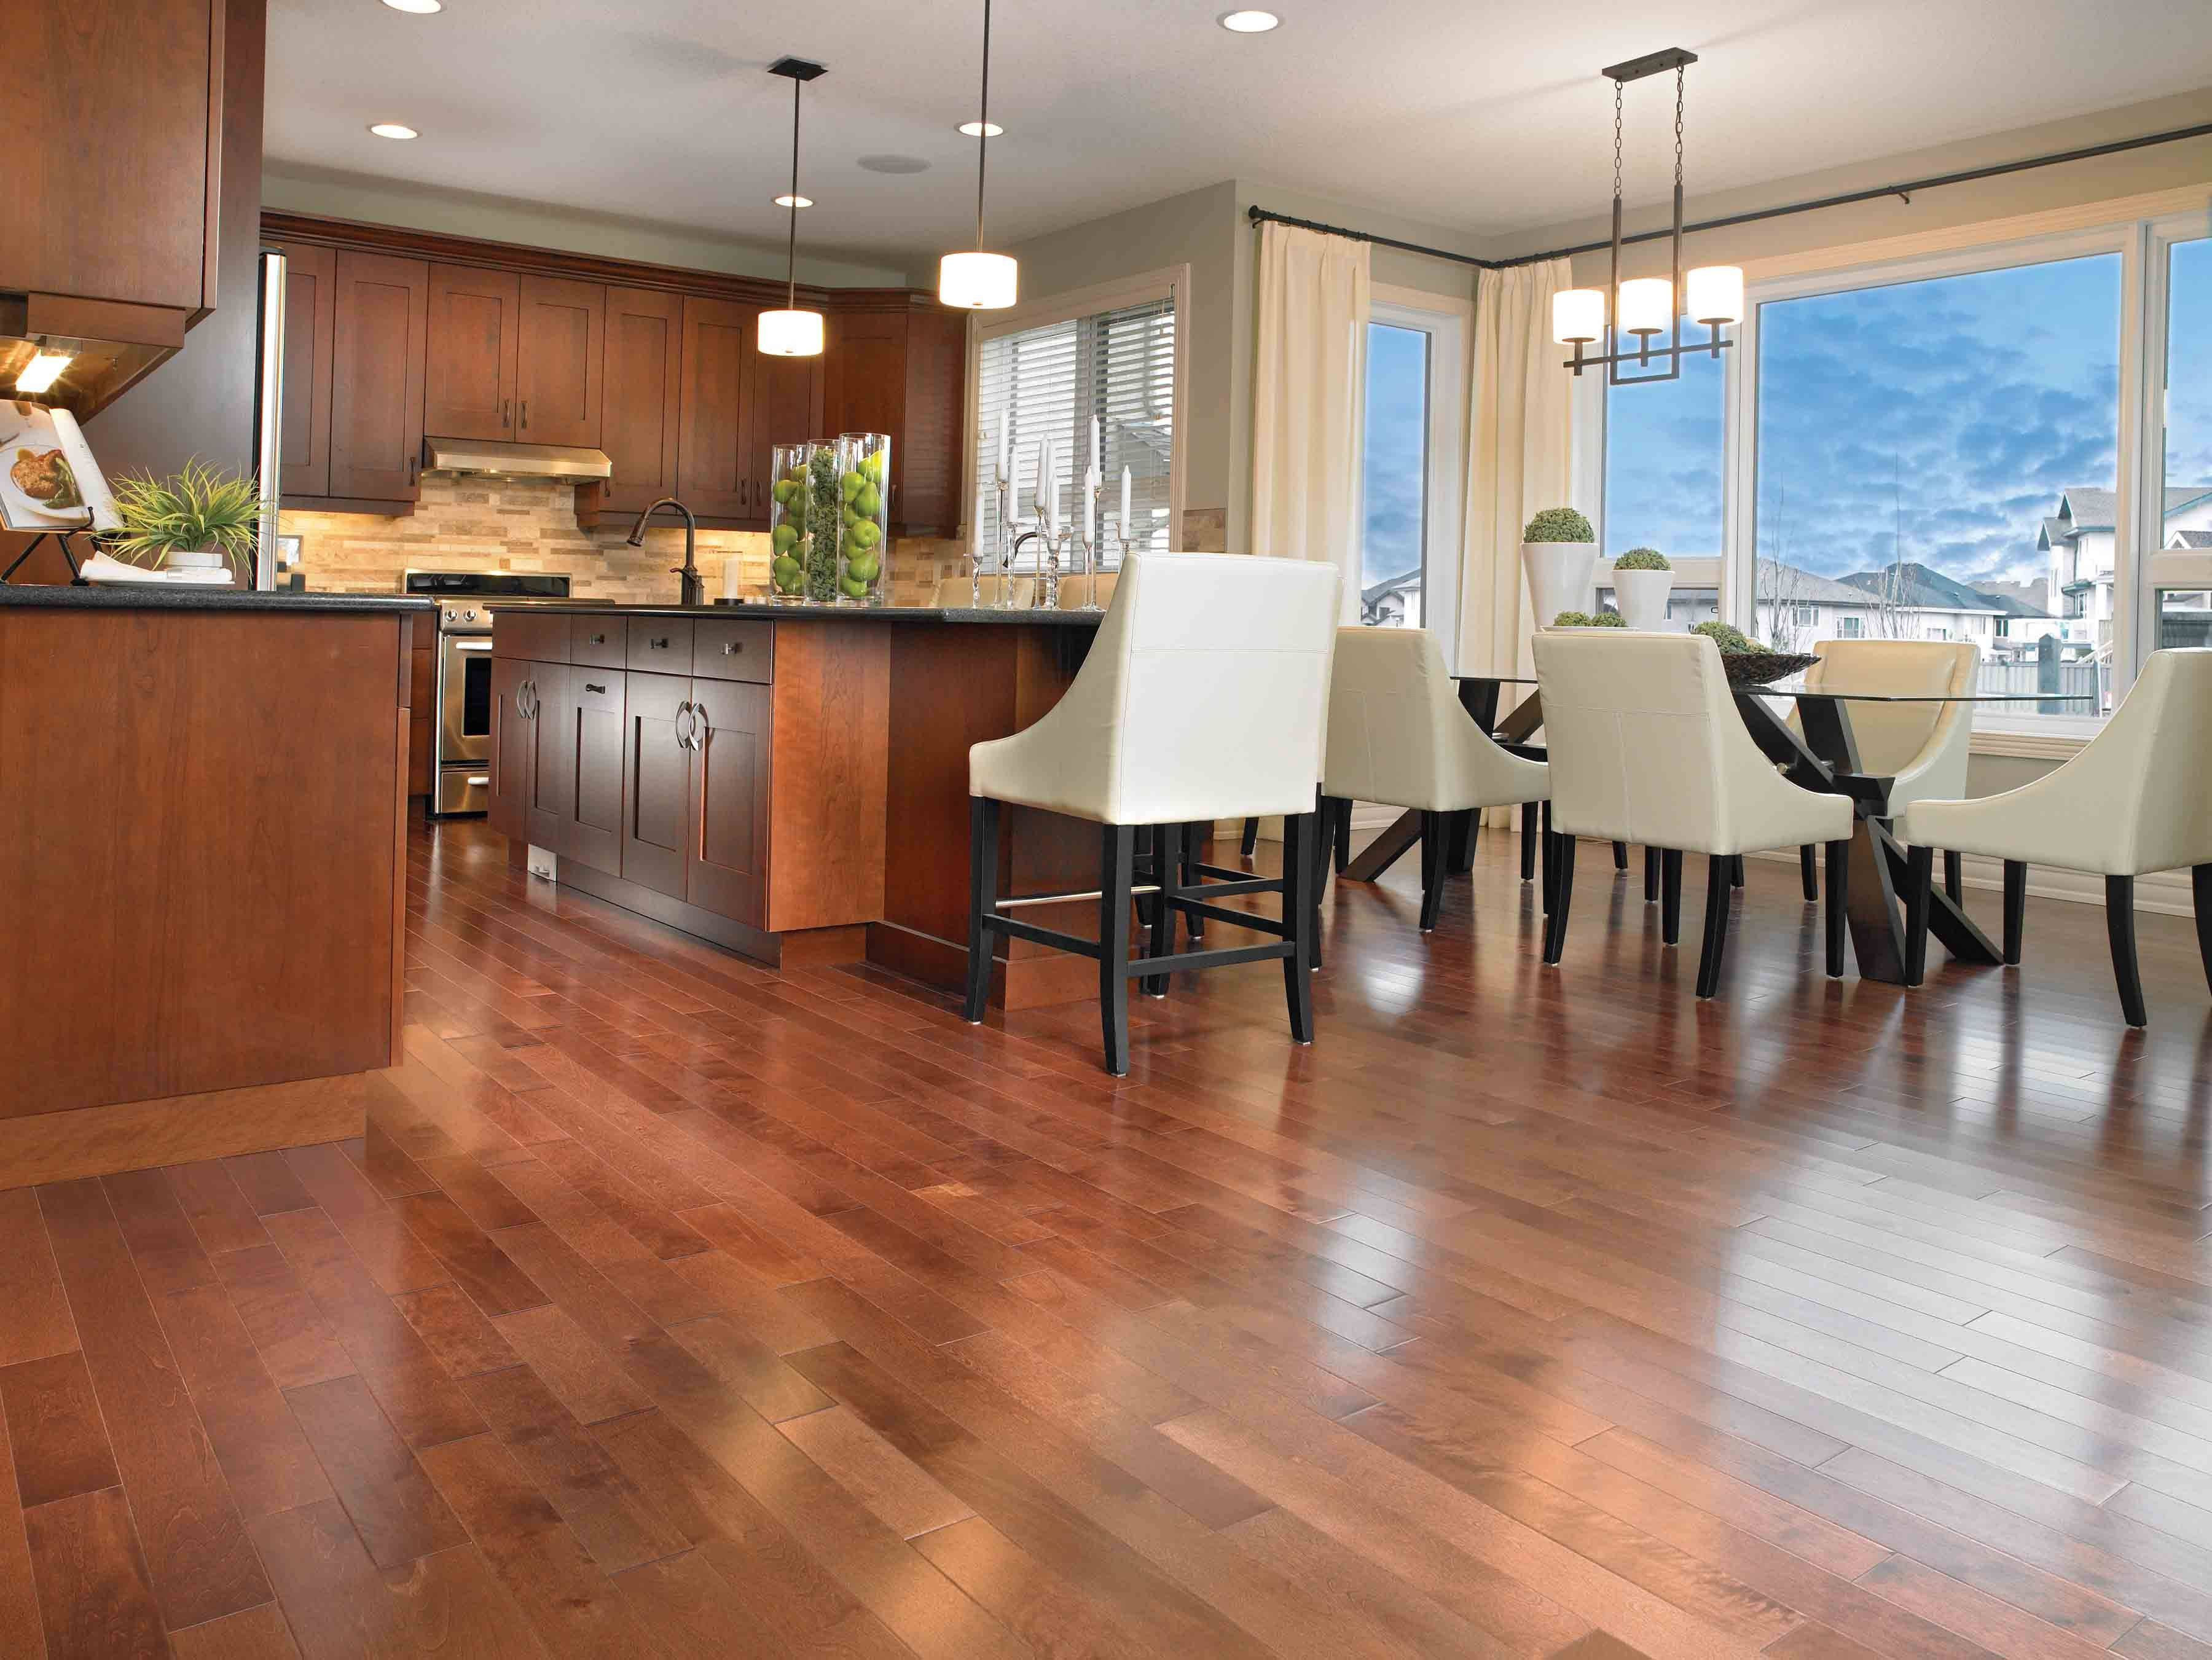 19 attractive Hardwood Flooring Nj 2024 free download hardwood flooring nj of flooring nj furniture design hard wood flooring new 0d grace place with regard to flooring nj furniture design hard wood flooring new 0d grace place barnegat nj